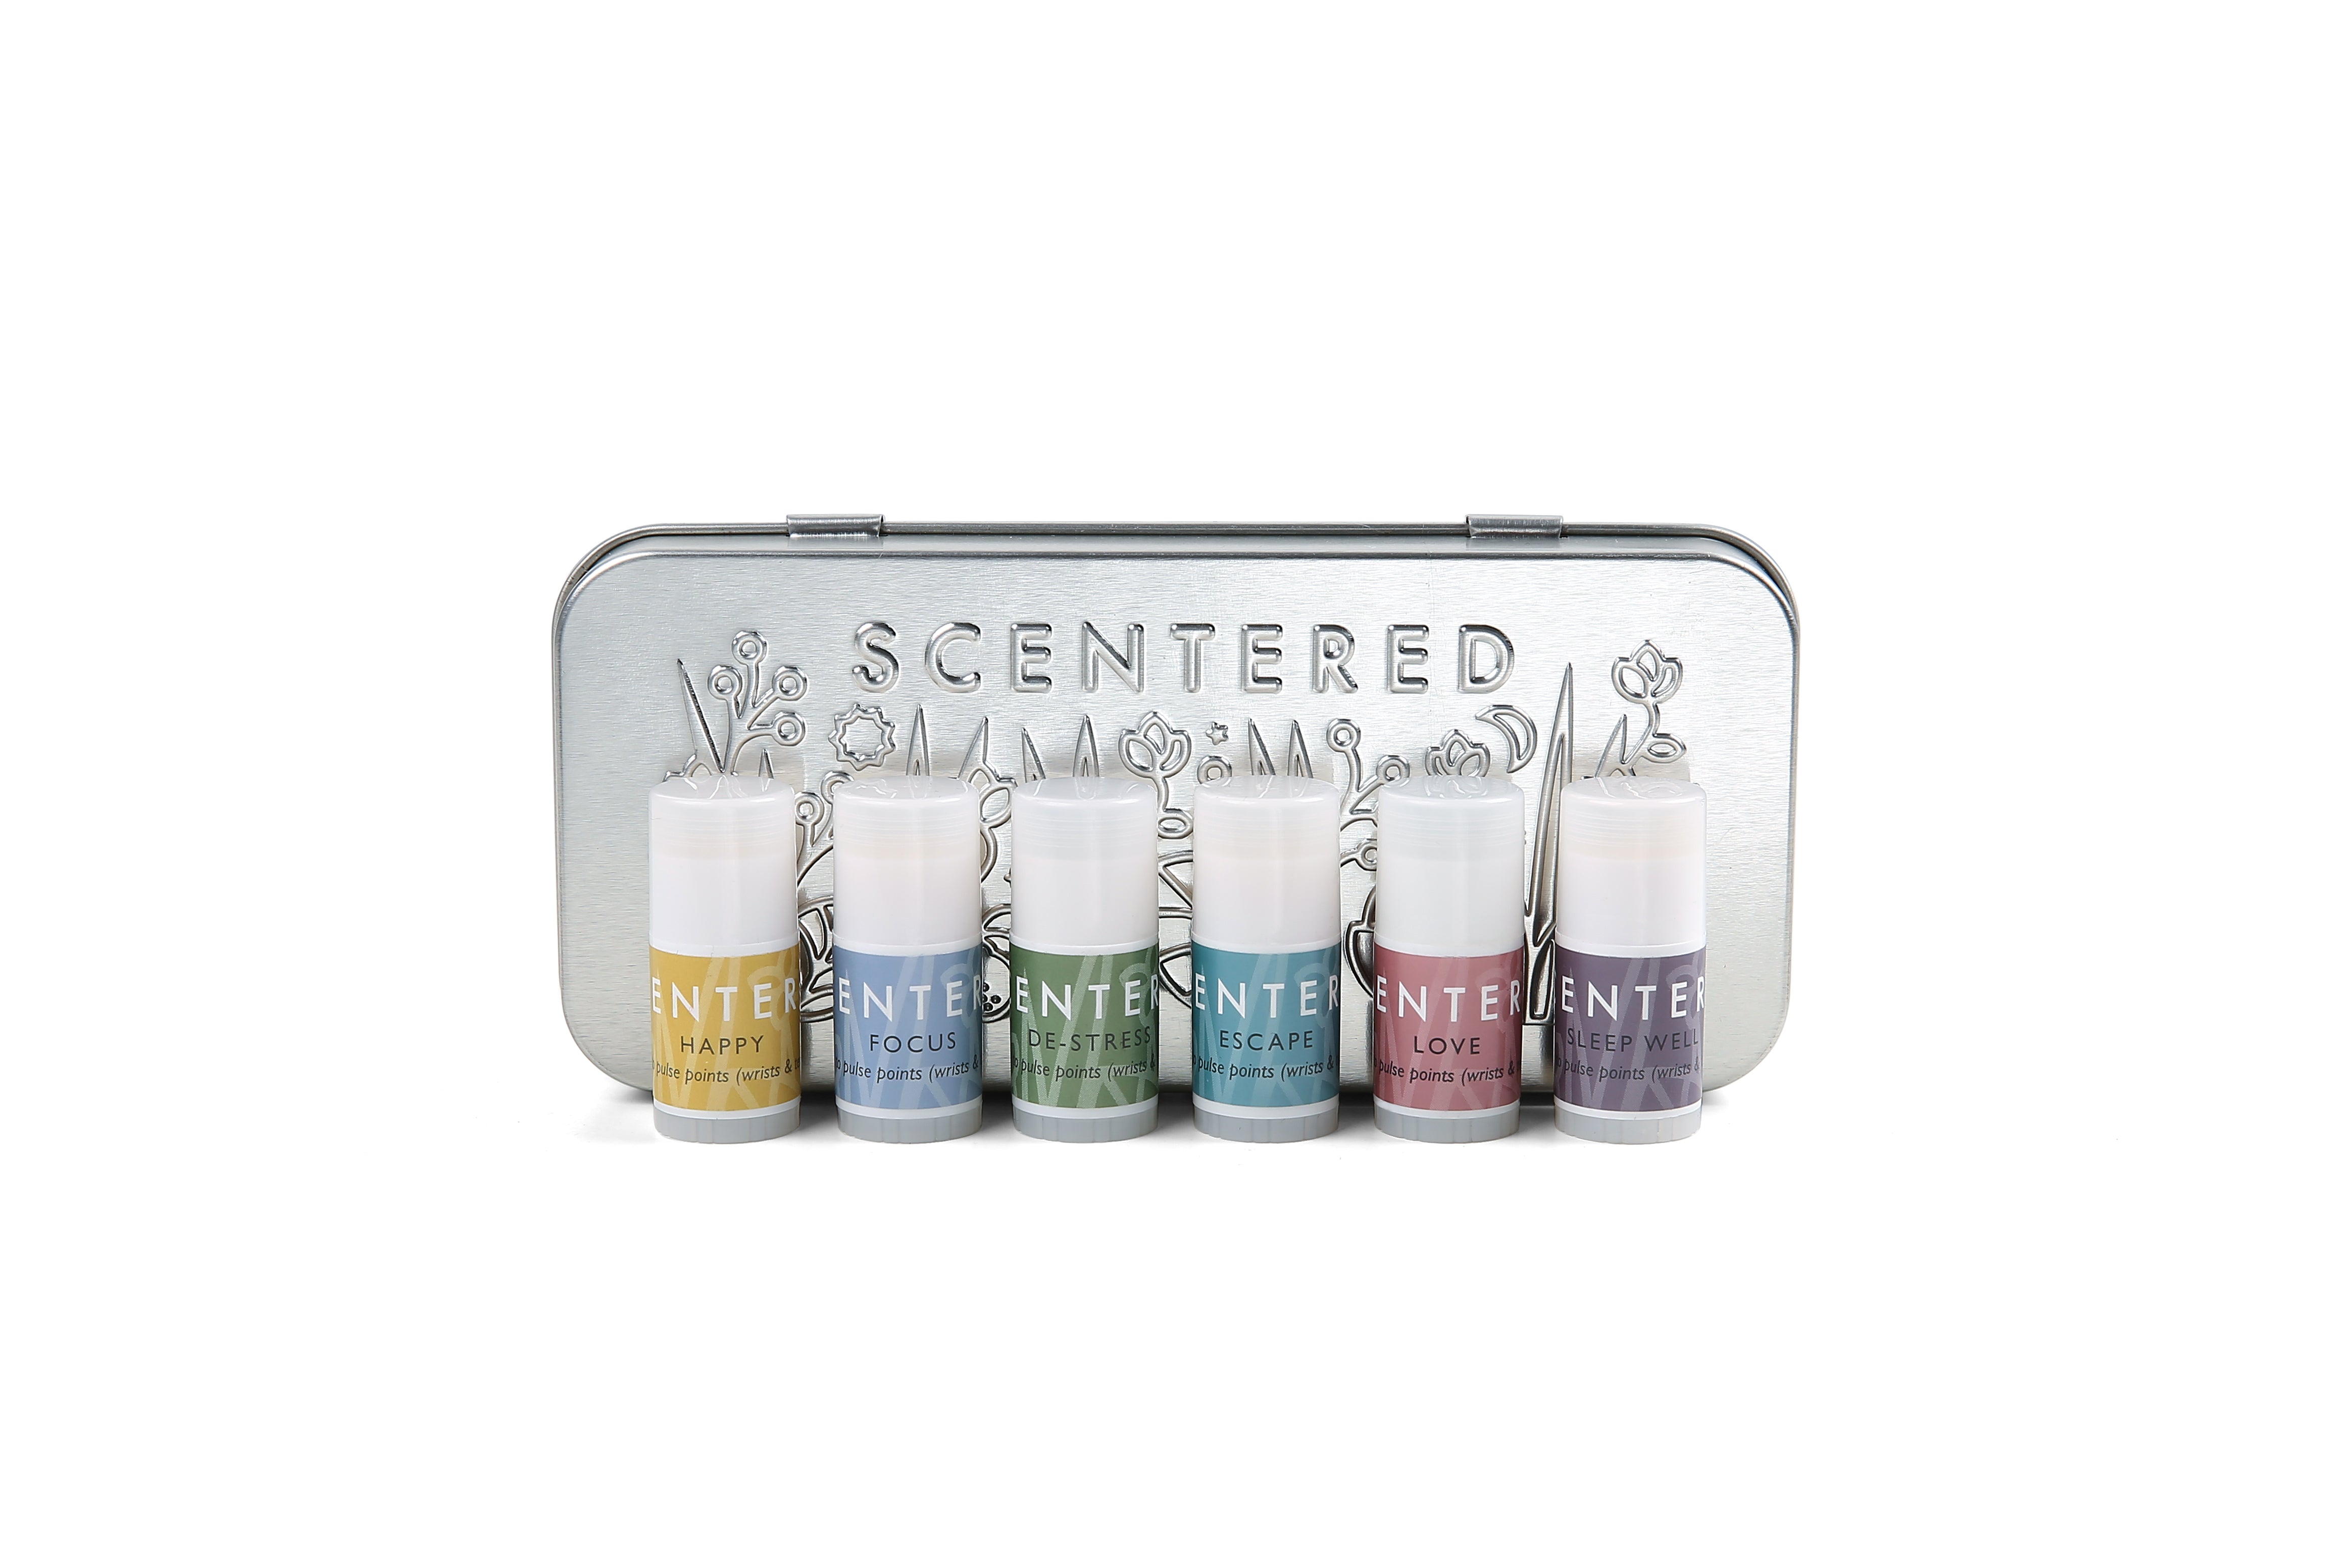 Scentered Aromatherapy Discovery Tin Set closed showing Scentered brand name on front of tin and embossed floral pattern.  In front of the tin  are the 6 aromatherapy balms included in the gift set: Happy, Focus, De-stress, escape, Love and Sleep Well Aromatherapy Mini Pulse point balm sticks 1.5g